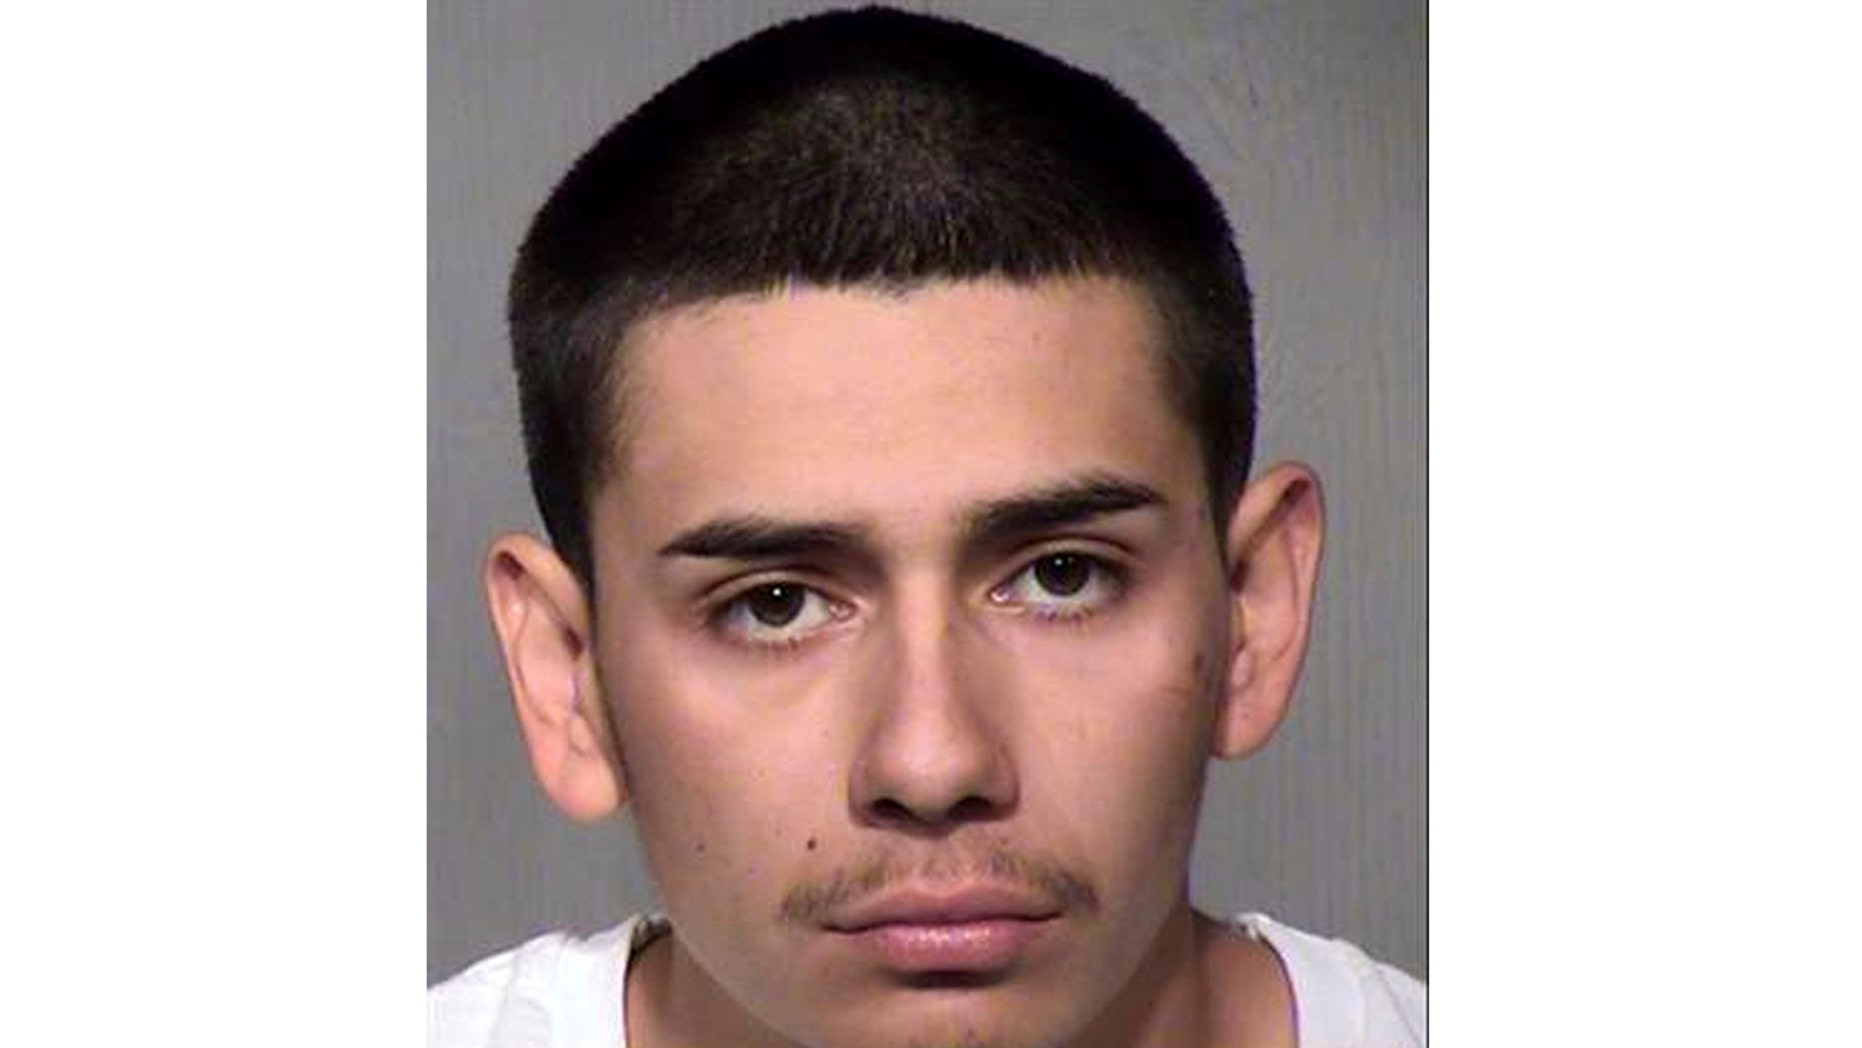 Joshua Gonzalez is pictured in the photo taken Thursday by the Maricopa County Sheriff's Office. (Maricopa County Sheriff's Office via AP)